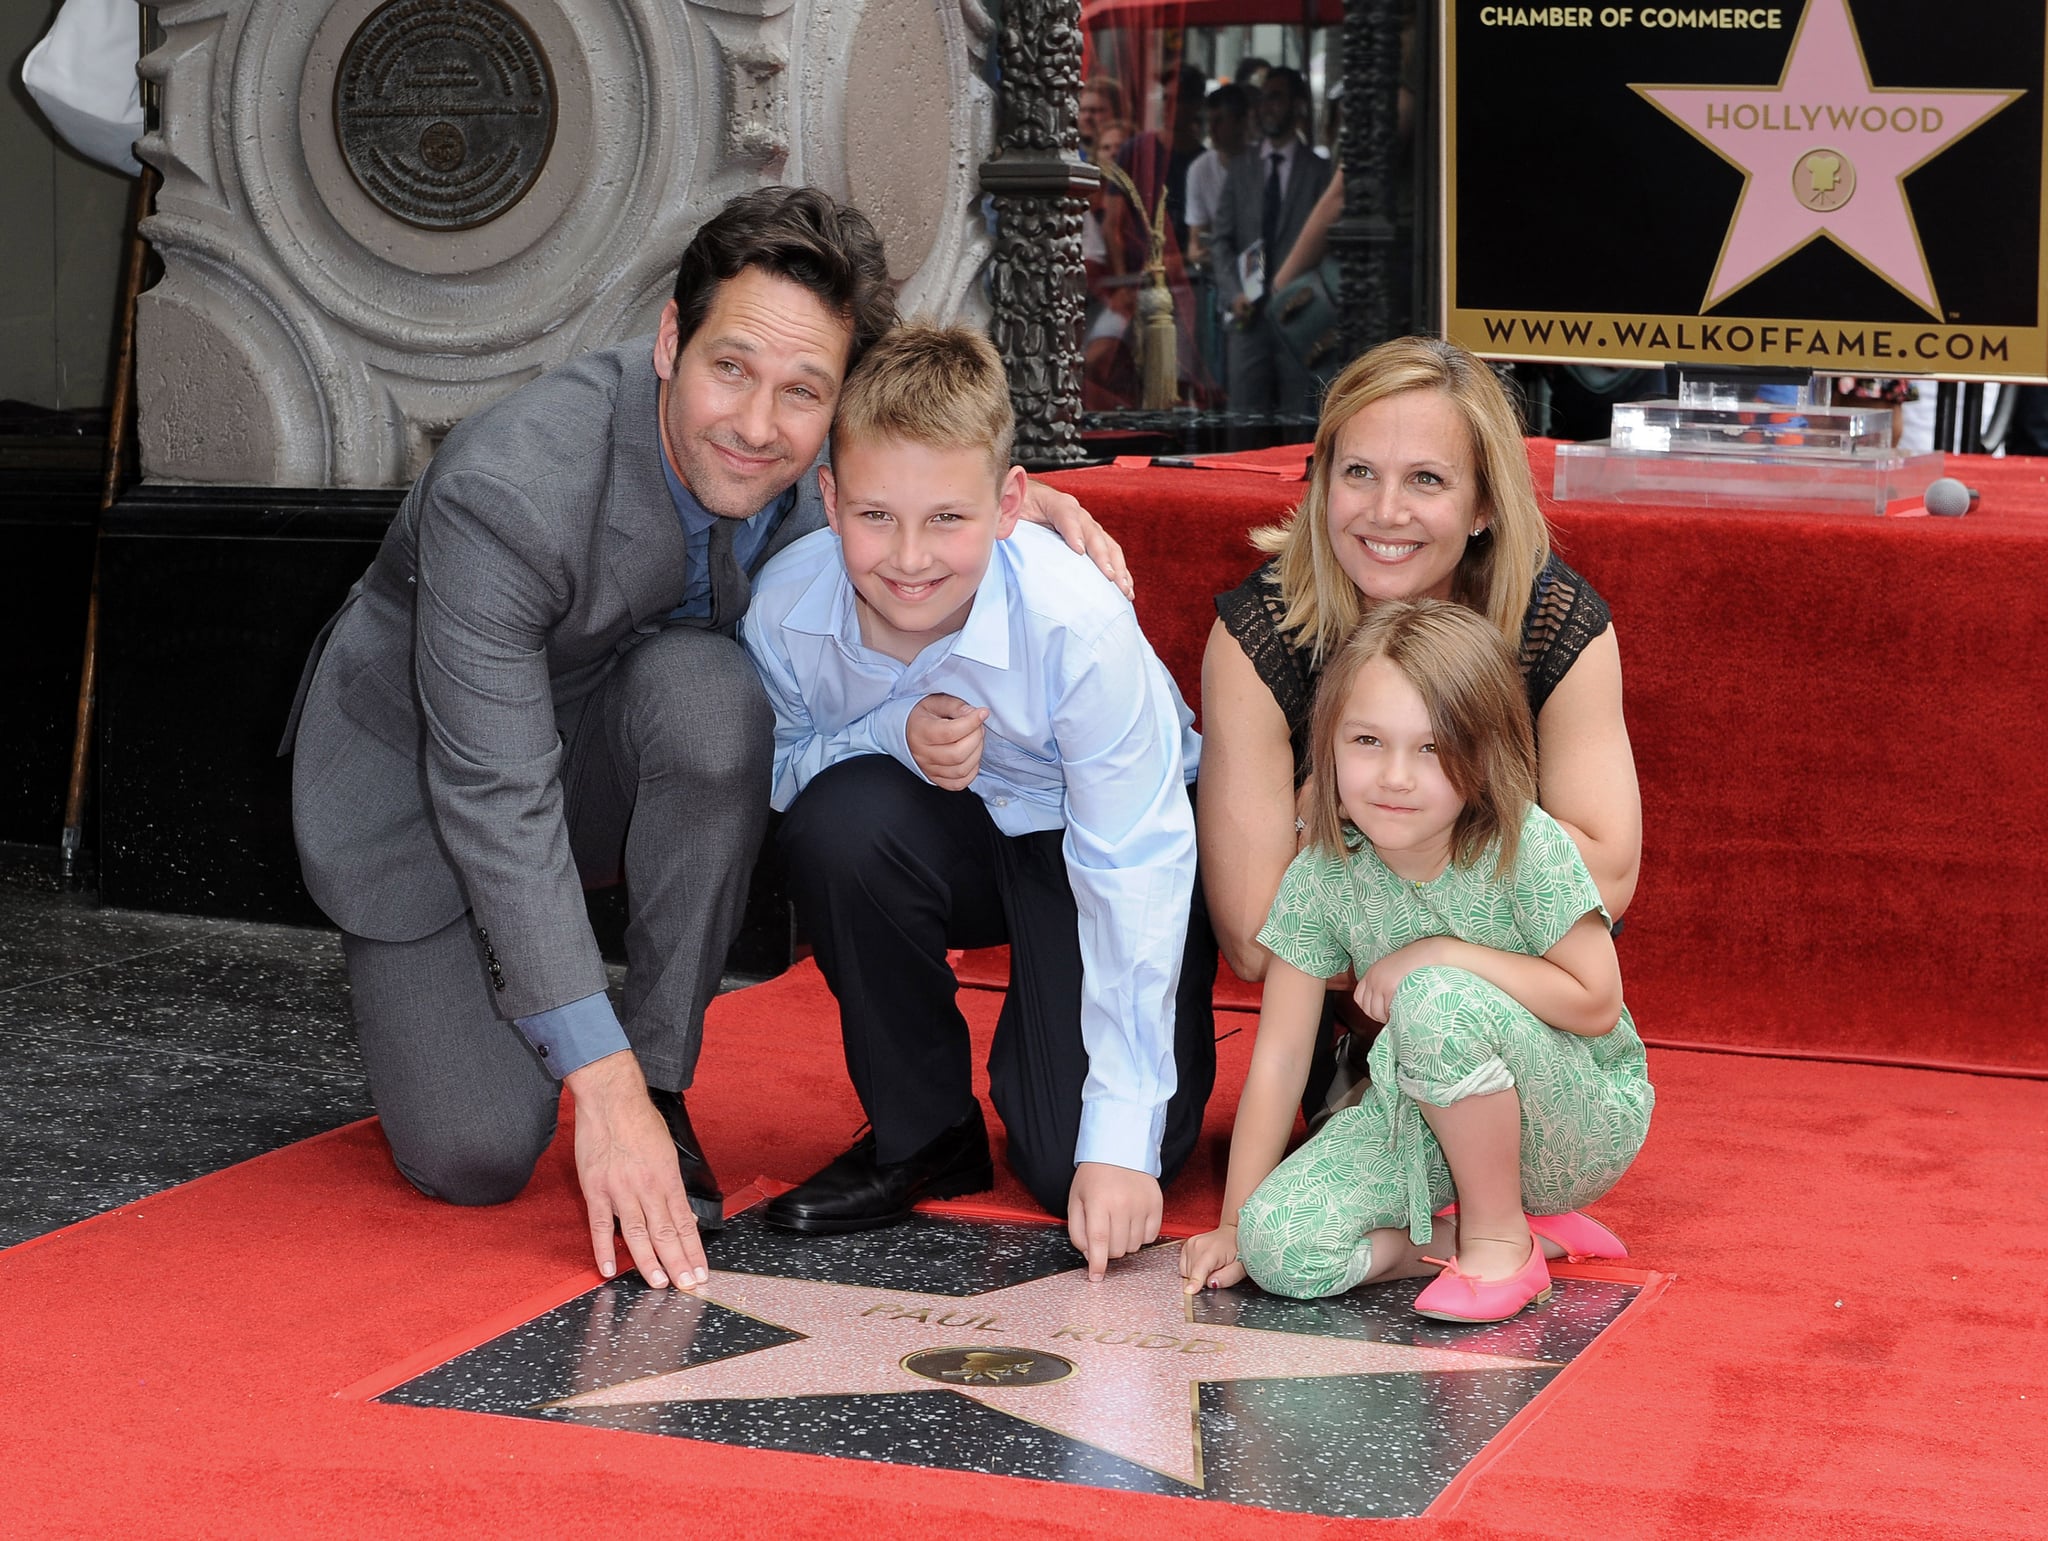 HOLLYWOOD, CA - JULY 01:  Actor Paul Rudd, wife Julie Yaeger, son Jack Rudd and daughter Darby Rudd attend the ceremony honoring Paul Rudd with a star on the Hollywood Walk of Fame on July 1, 2015 in Hollywood, California.  (Photo by Axelle/Bauer-Griffin/FilmMagic)